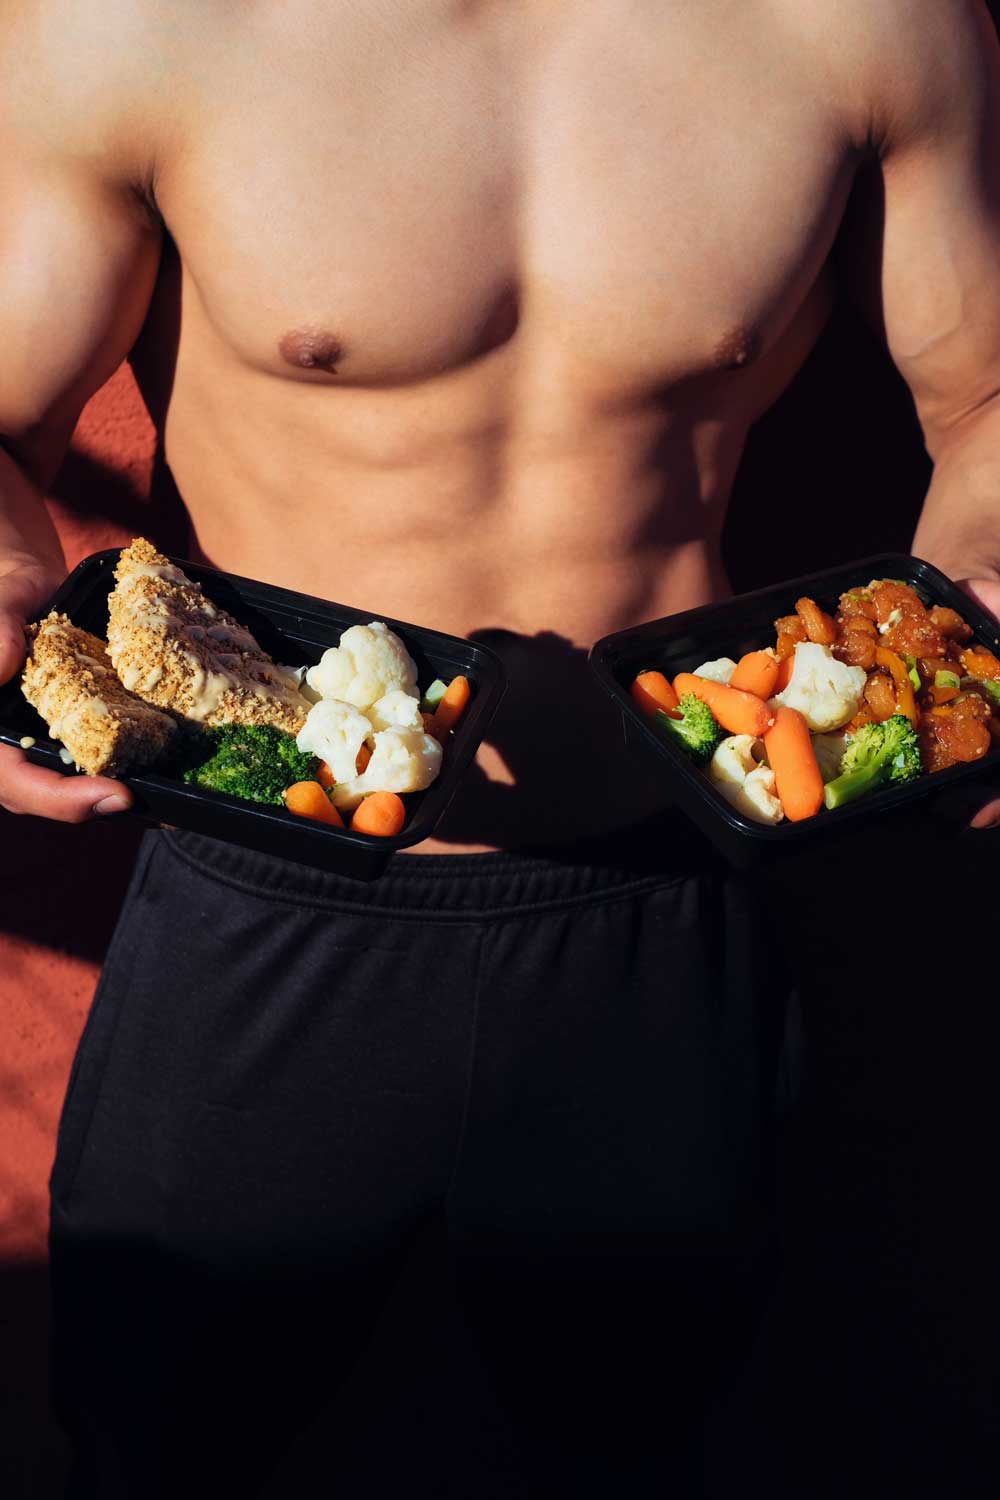 Fuelling Your Fitness Journey: Best Practices, Meal Prep, and the Lft Ovrs App